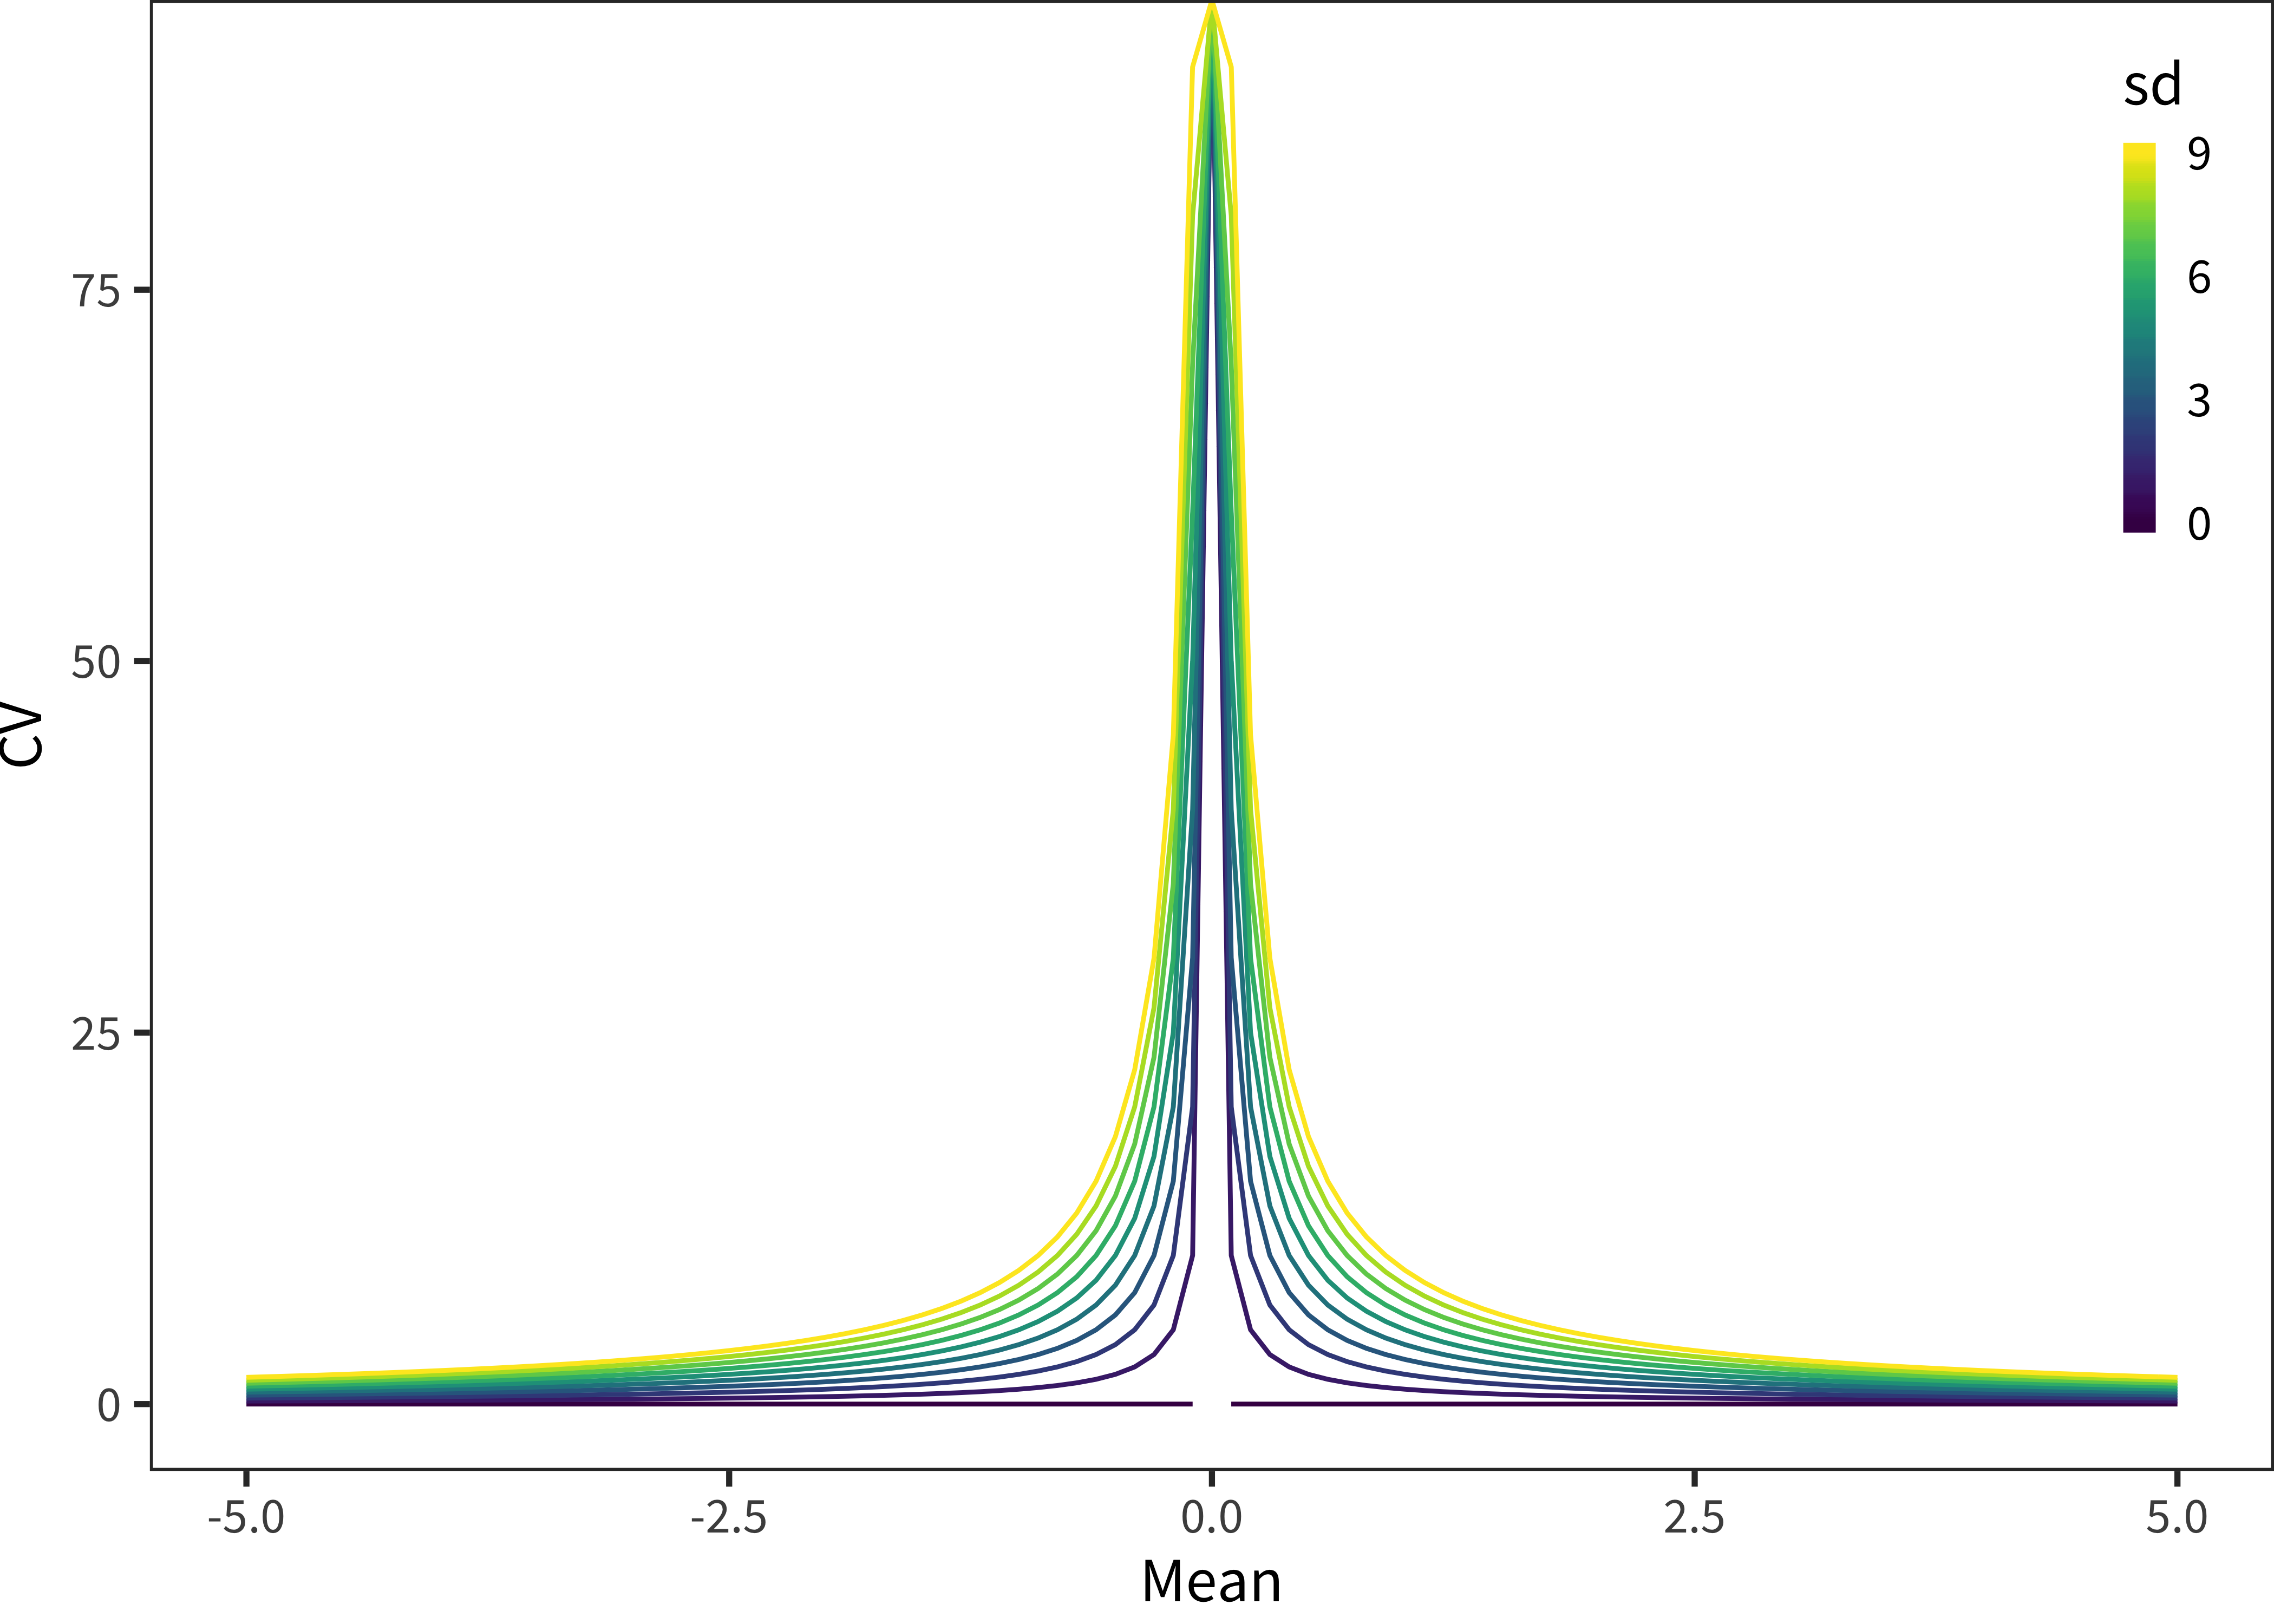 A theoretical analysis of the properties of the coefficient of variation (CV) method. CV is plotted by its two components: mean and standard deviation (sd). Mean values are shown on the horizontal axis, with colors indicating different standard deviations.